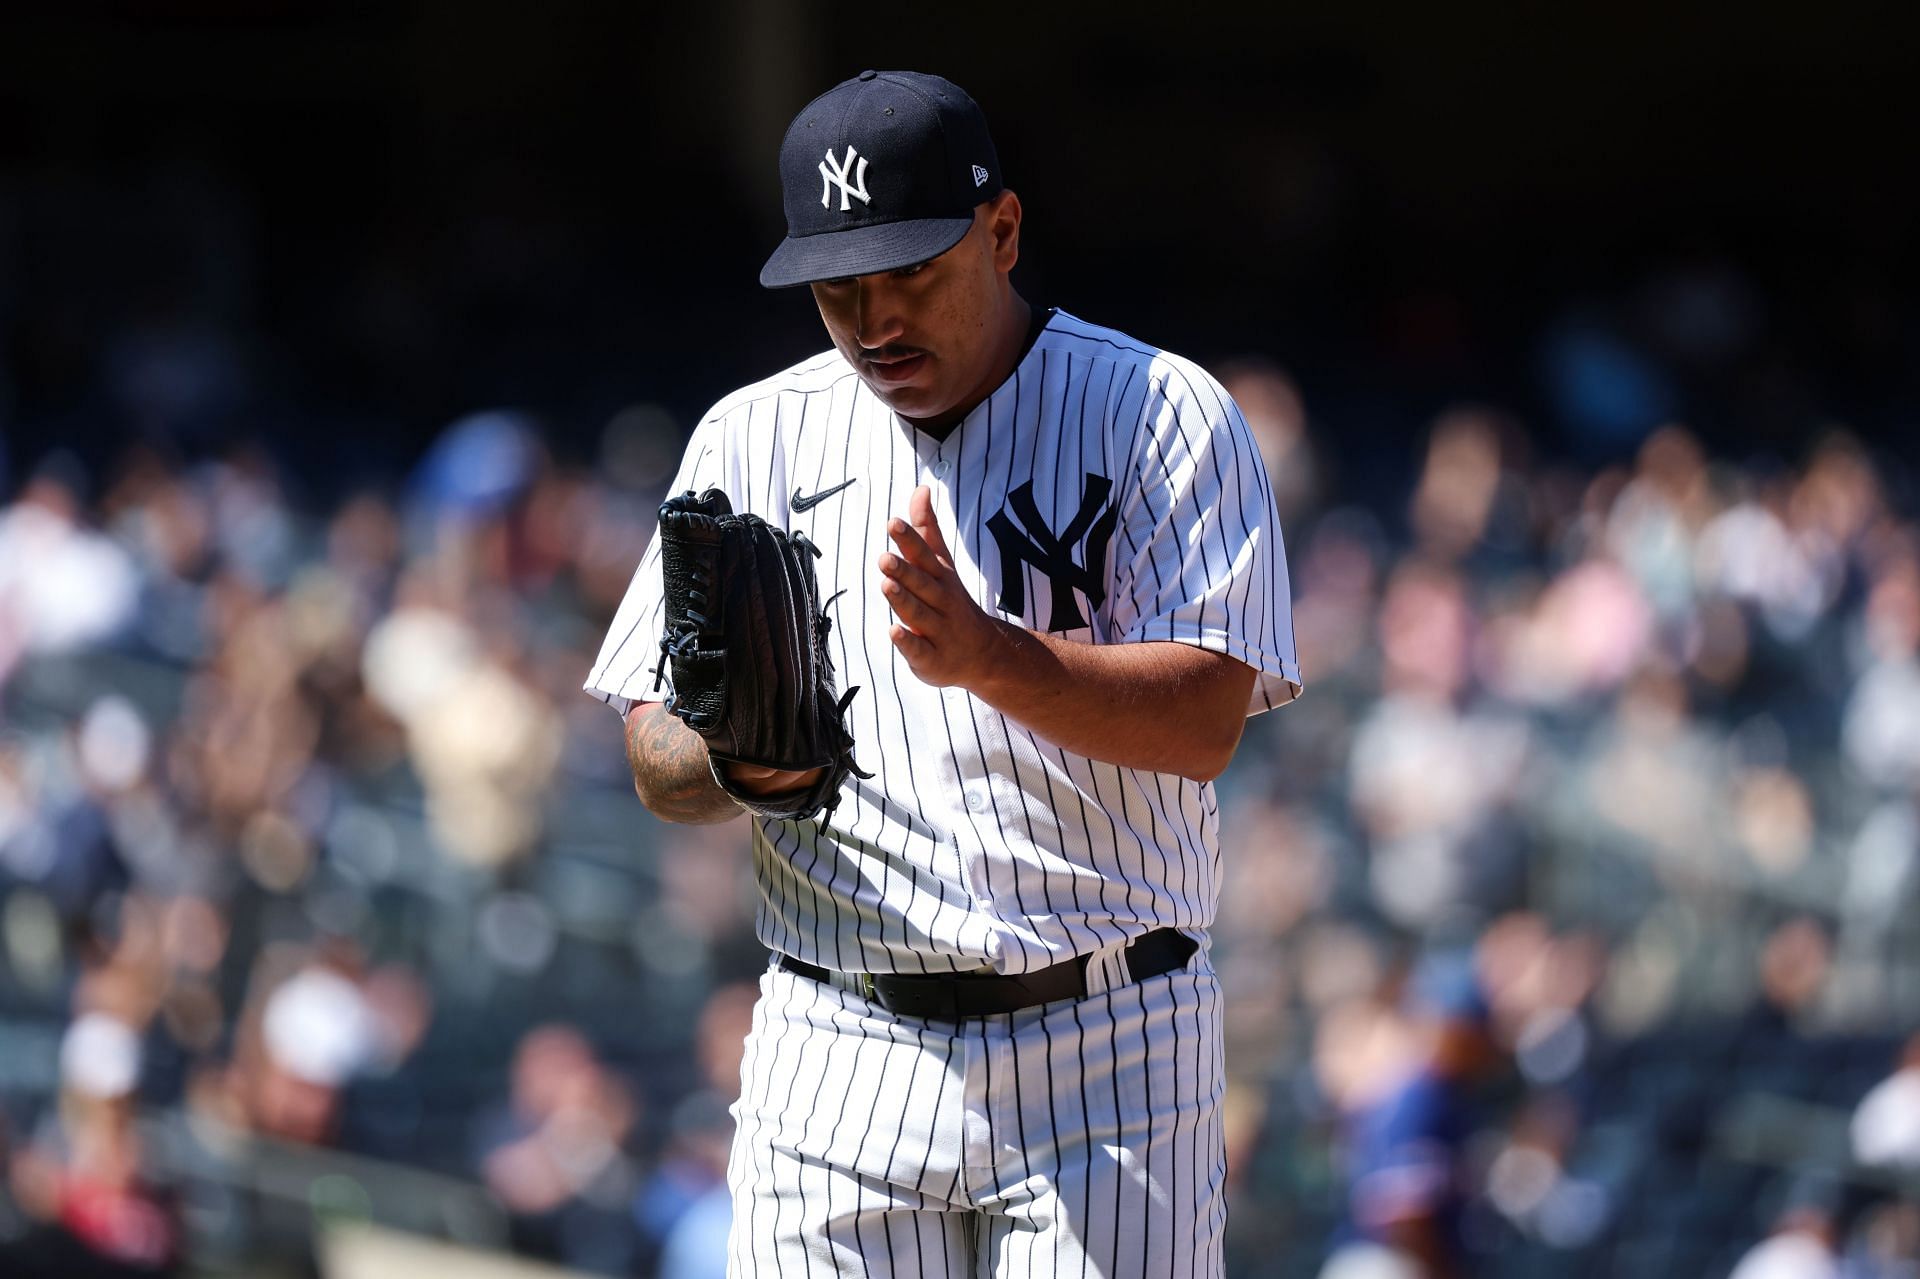 New York Yankees left handed starter Nestor Cortes has found his groove. He shut down the Texas Rangers, holding them to a single hit while striking out eleven batters